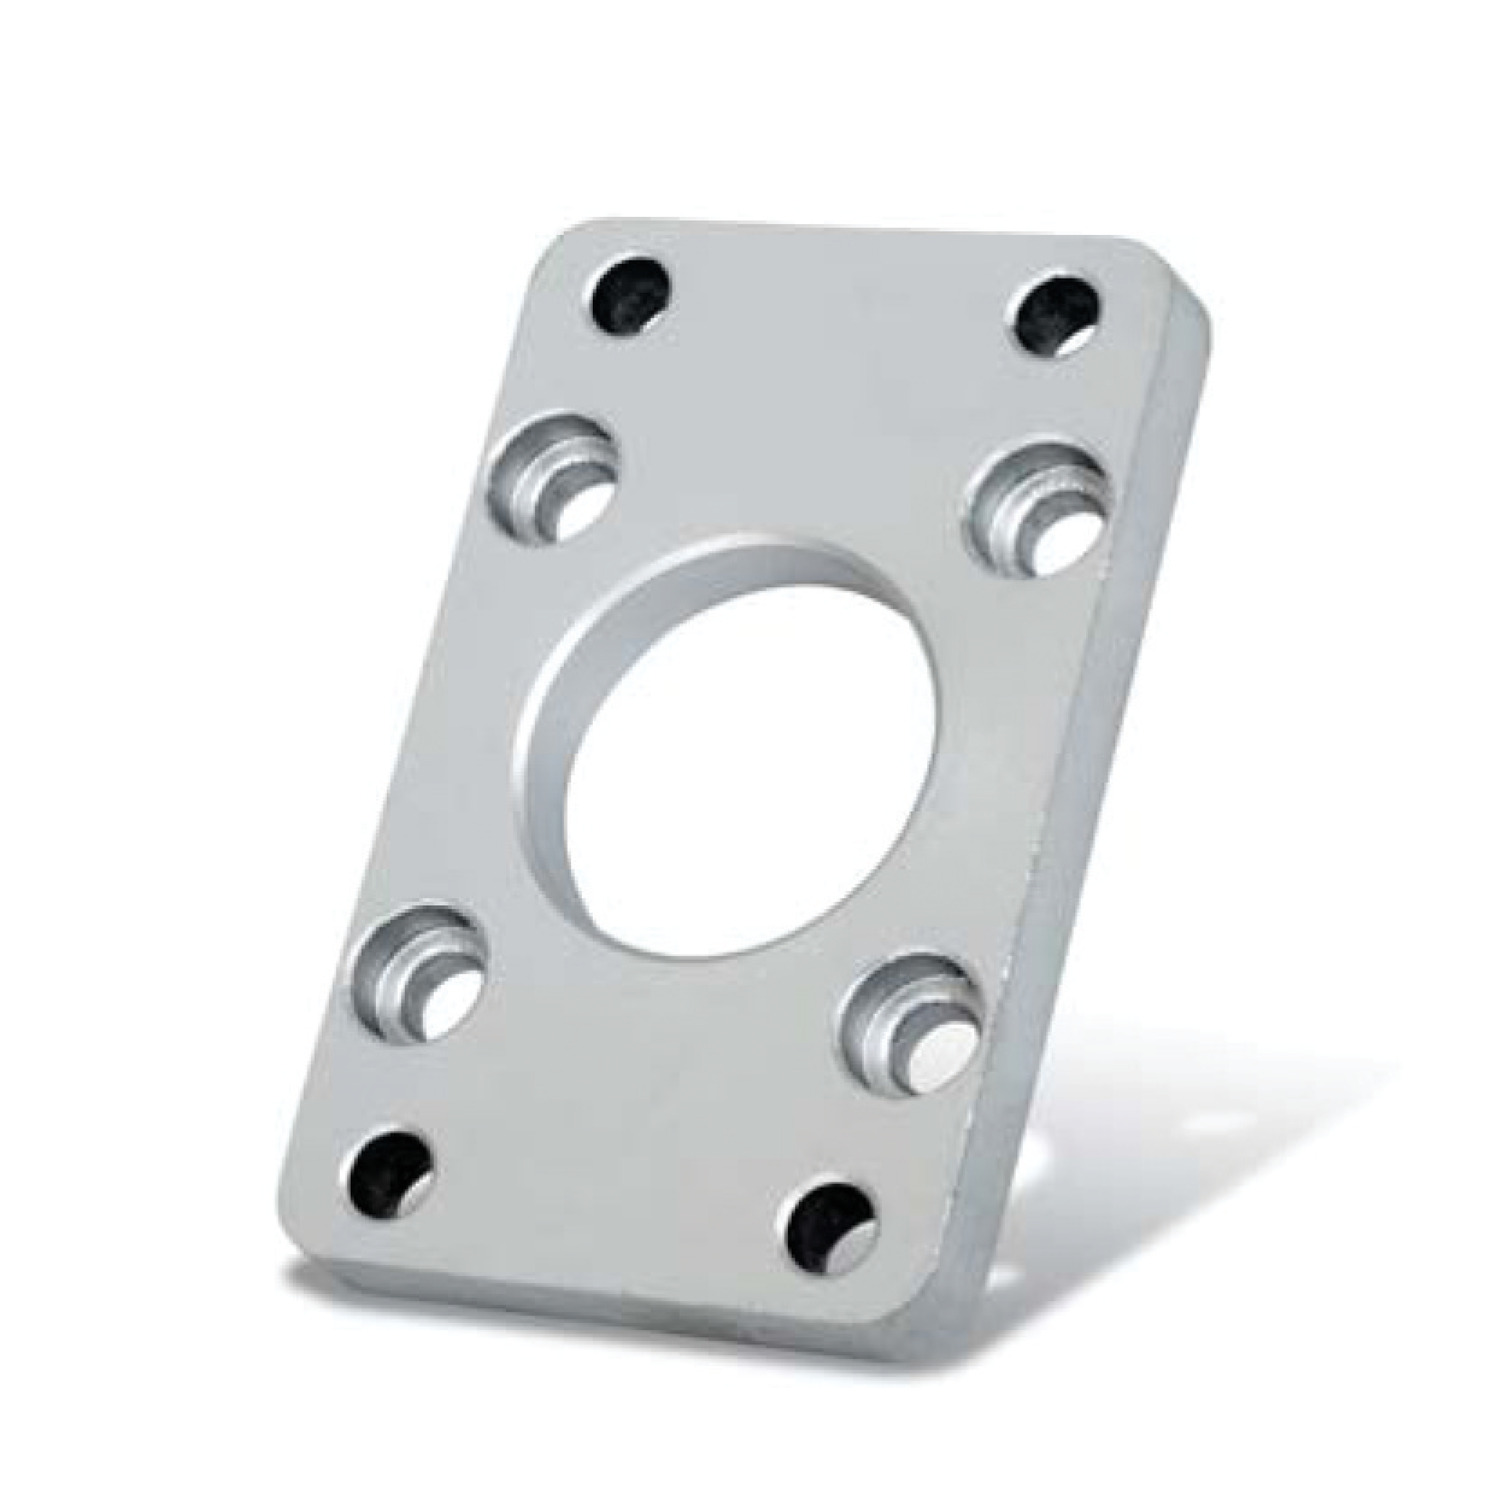 Product L4804, Air Cylinder Mounts - ISO Series mounting flange / 